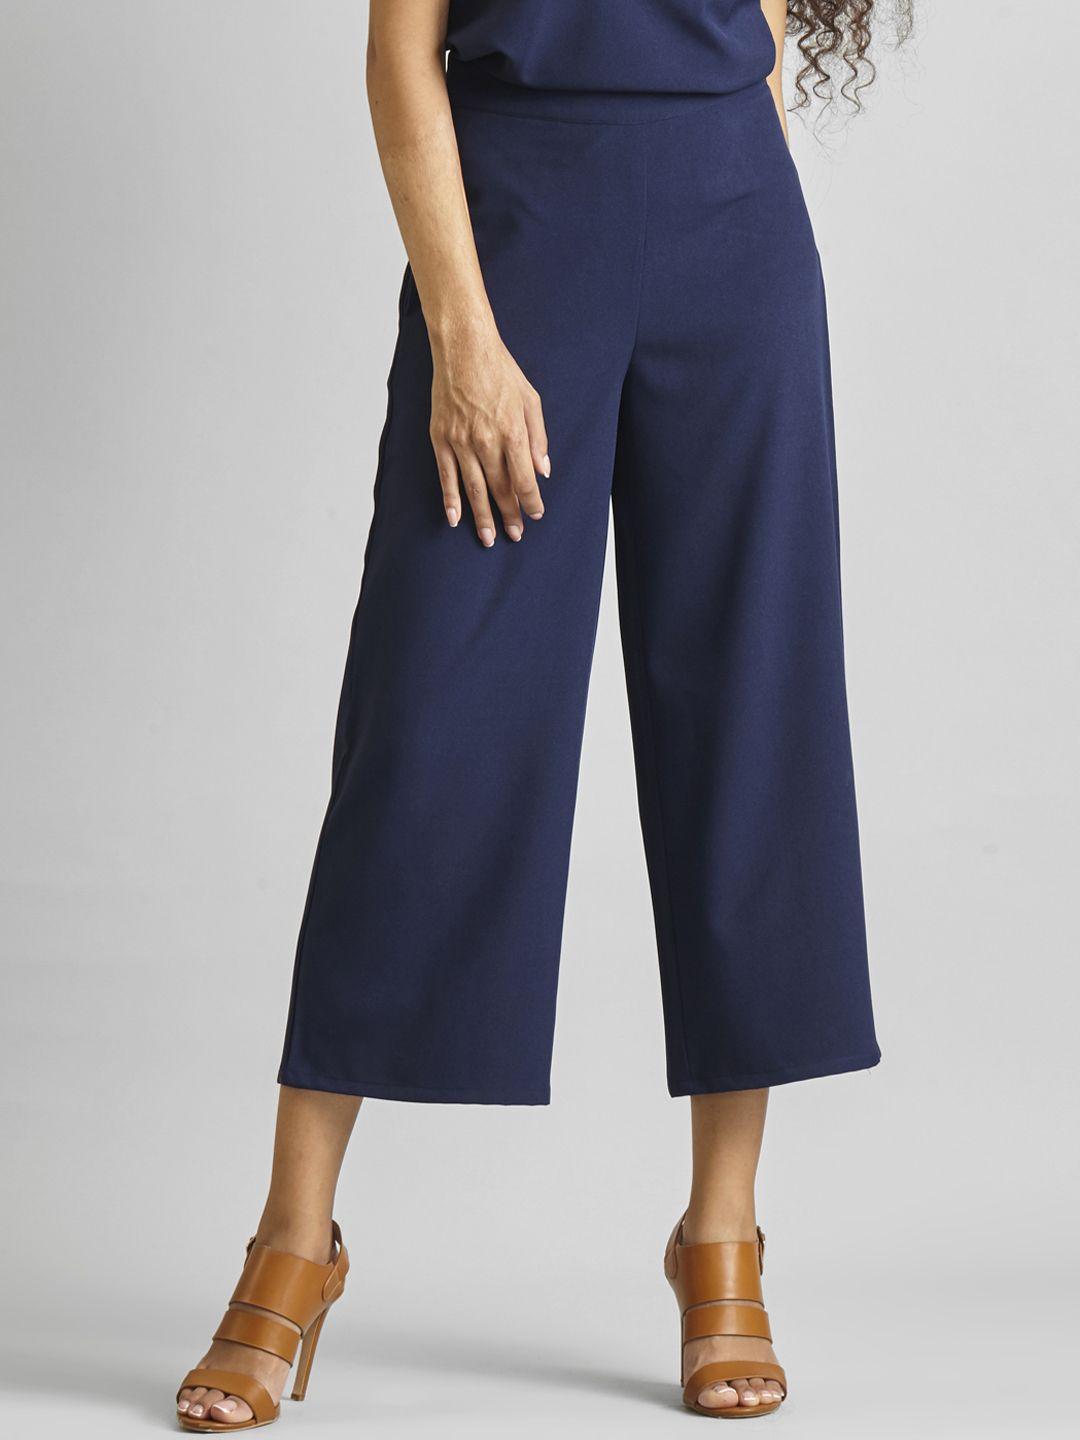 fablestreet-women-navy-blue-flared-solid-culottes